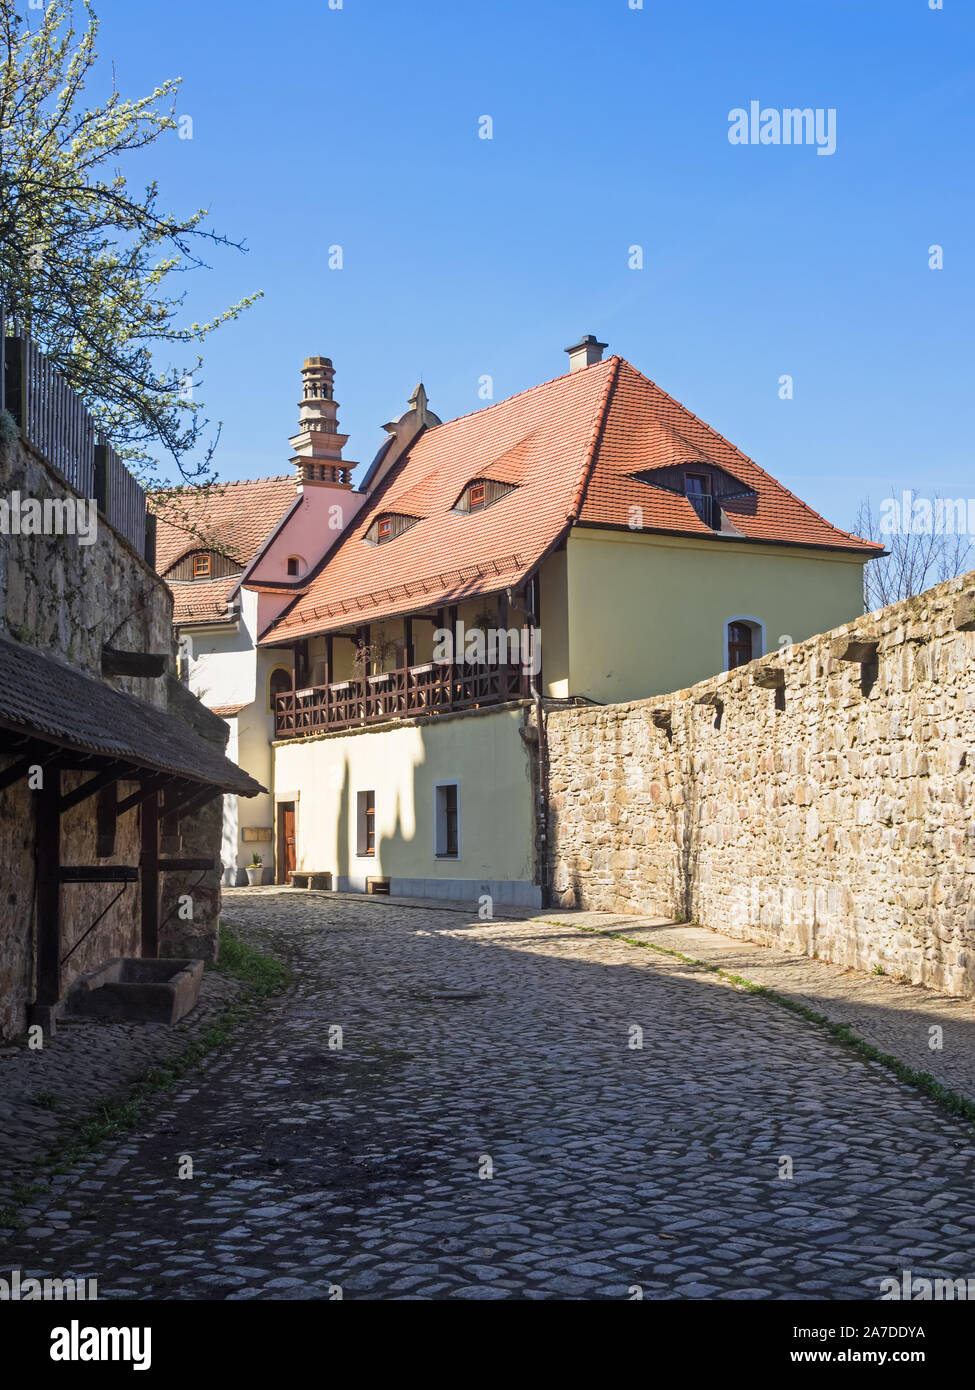 Alley in the old town of Bautzen, Saxony, Germany Stock Photo